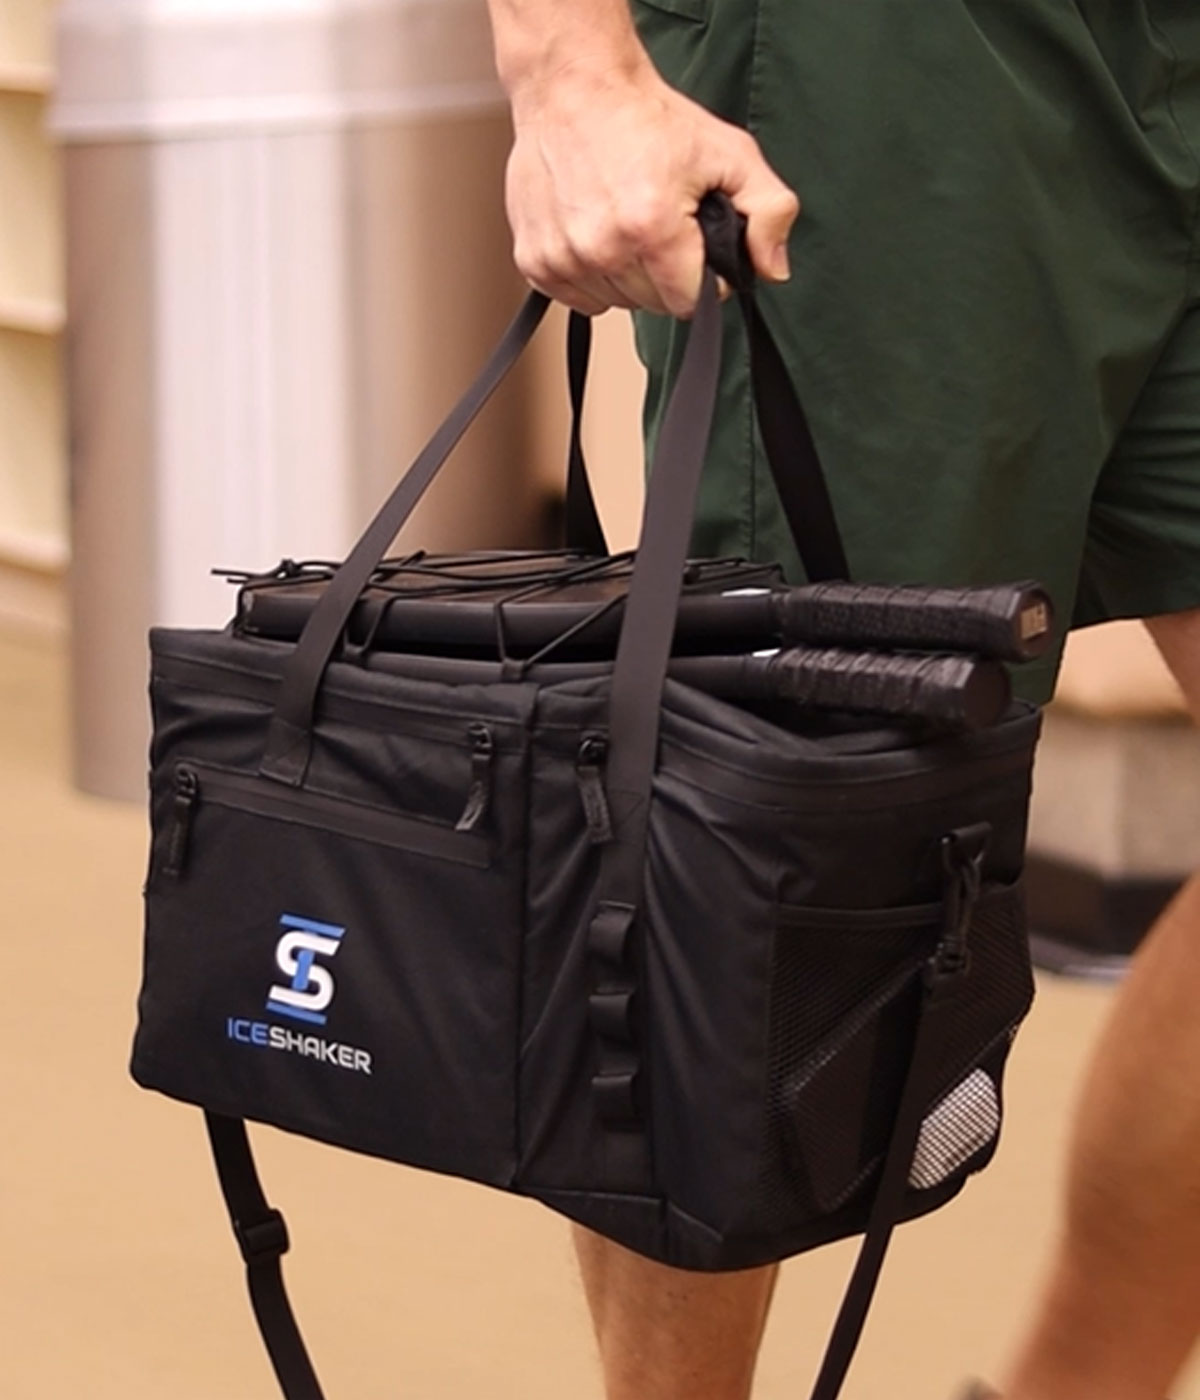 This image shows the Duffel Bag being held firmly by the durable carry handles.